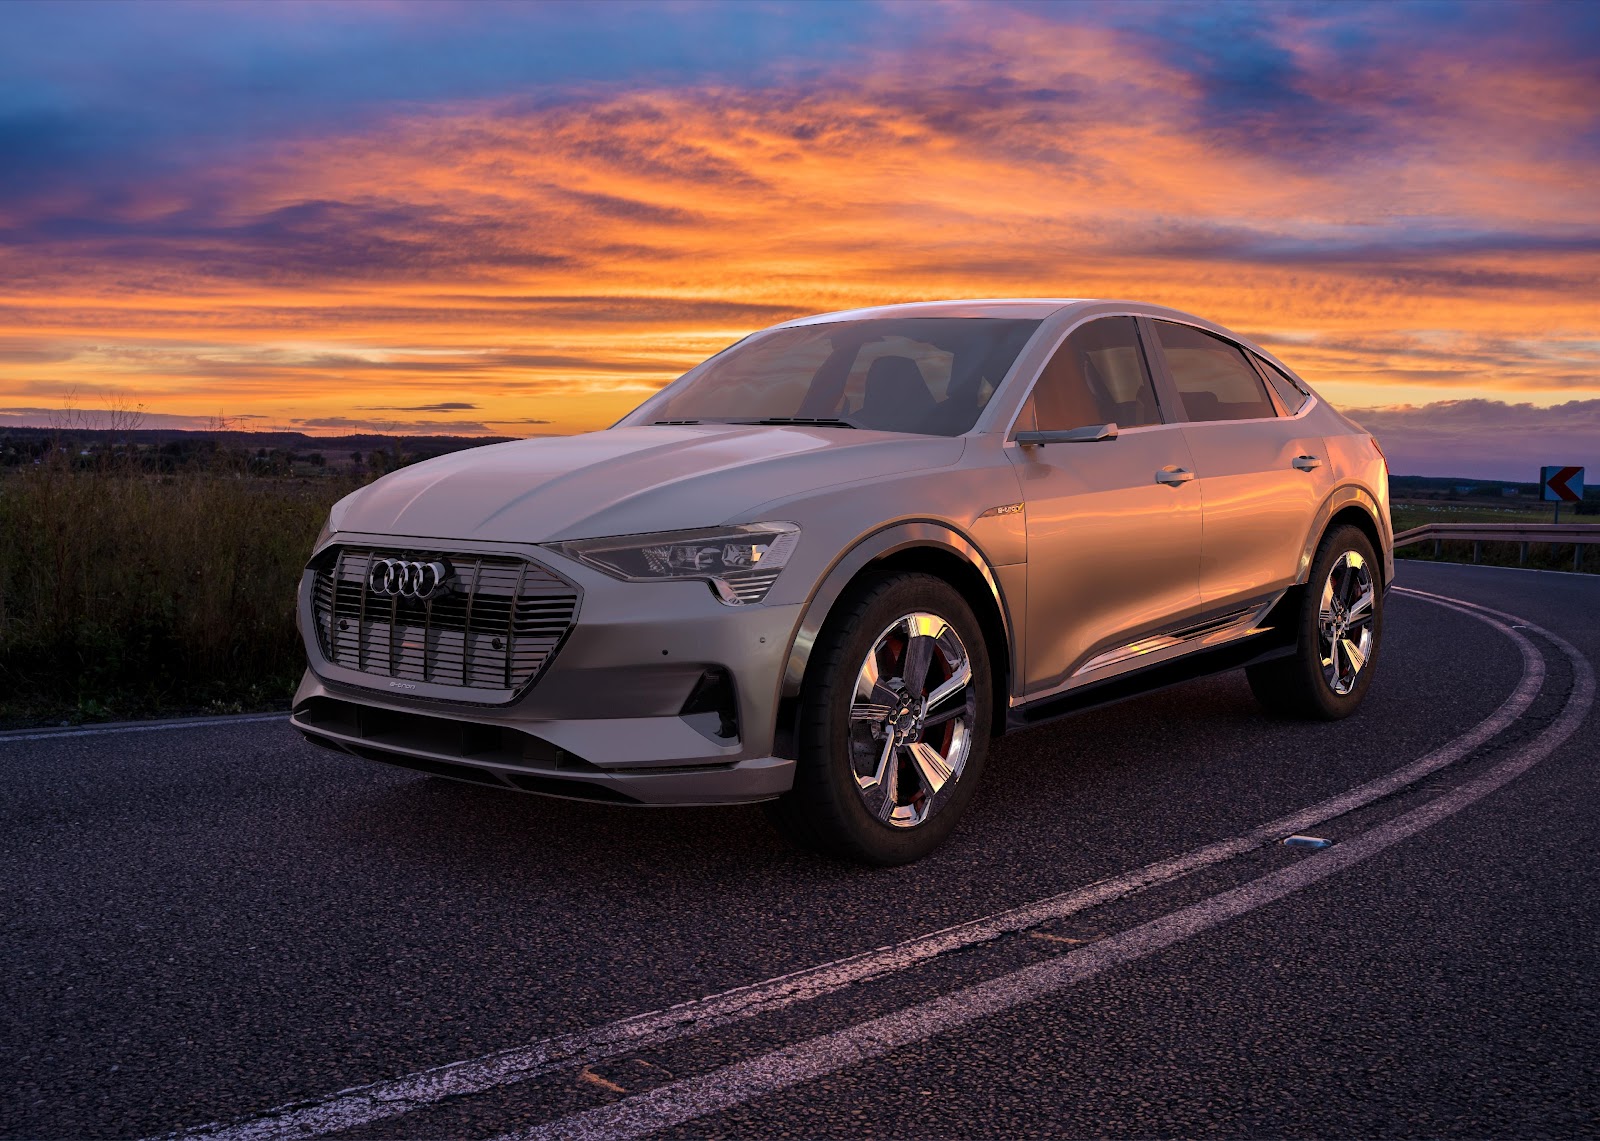 Audi e-tron Sportback on the road with a sunset.